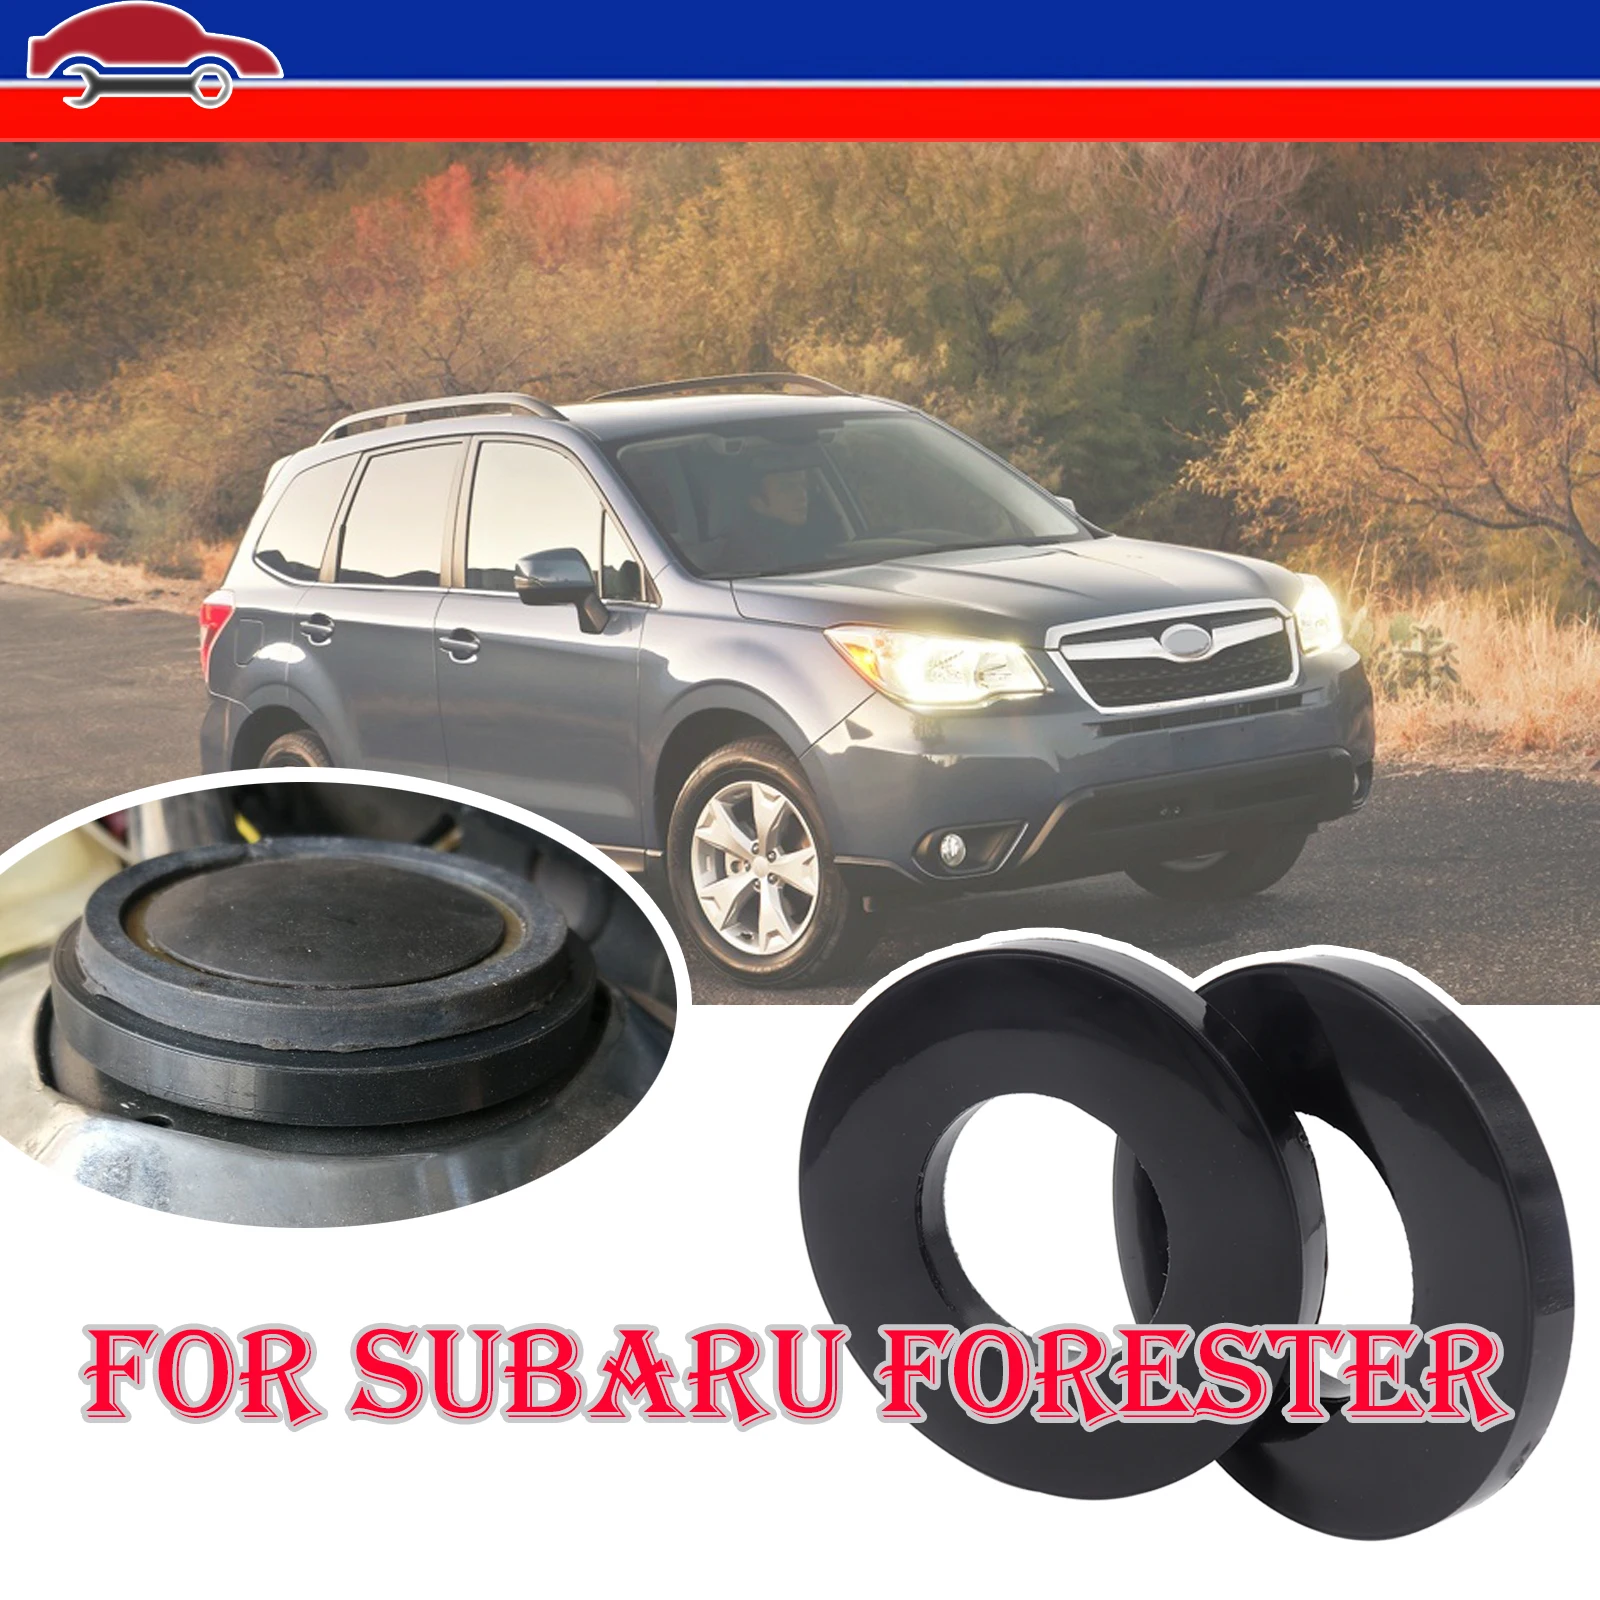 

2X For Subaru Forester Car Front Shock Absorber Tower Rubber Buffer Ring Bushing Bearing Washer Protector Durable Reduce Noise